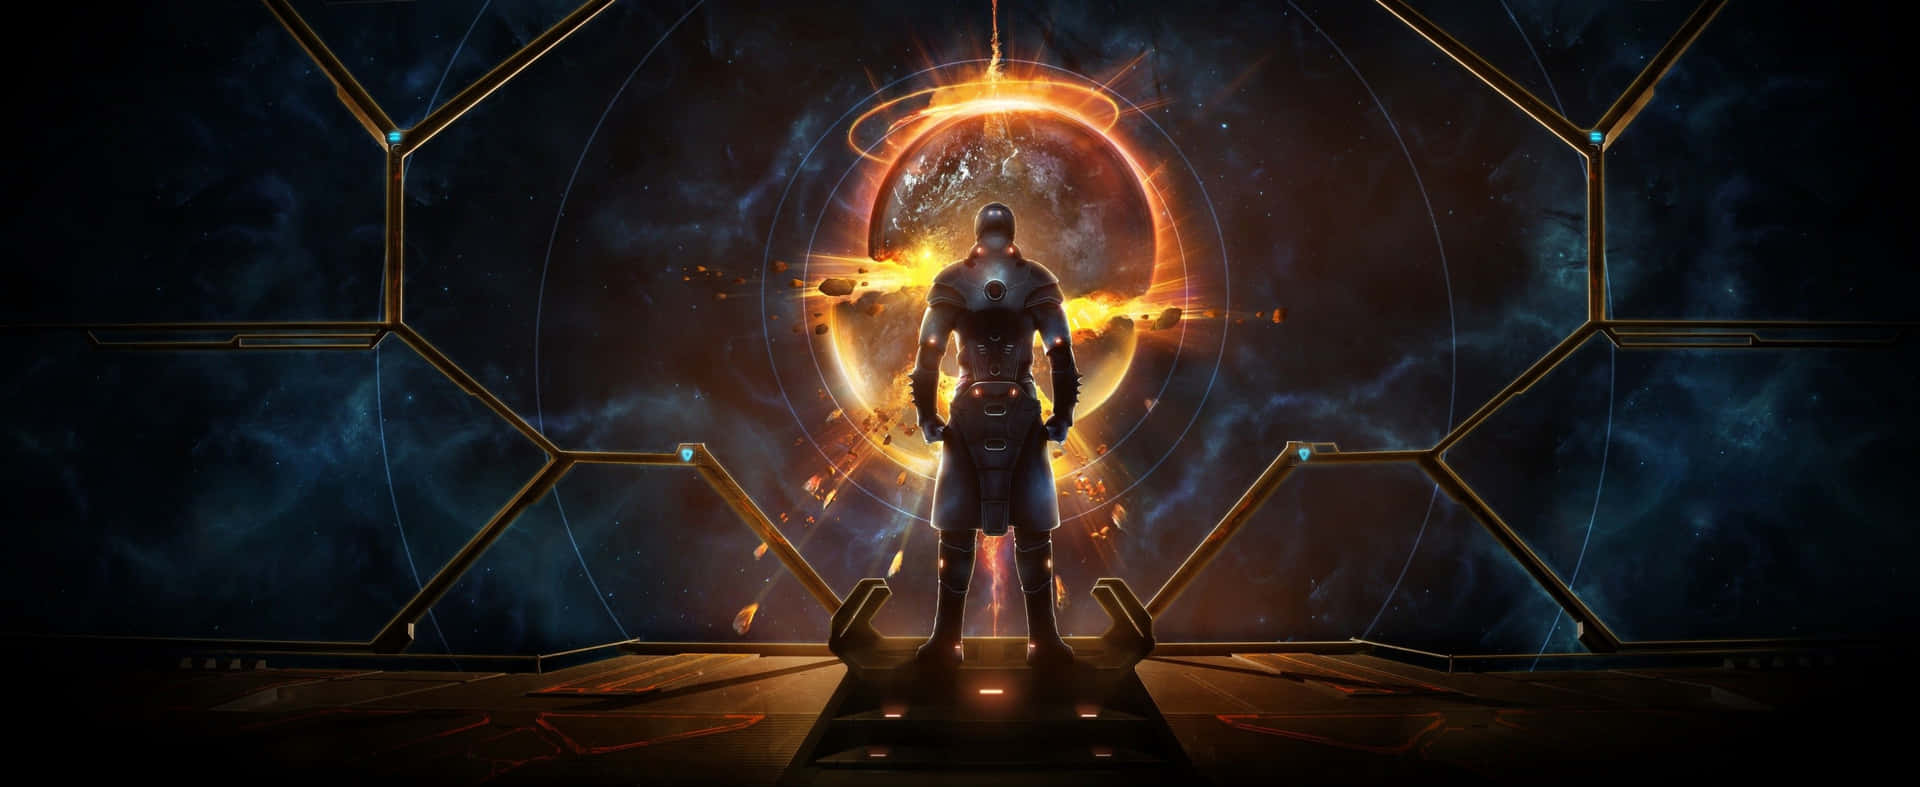 3440x1440 Game Starpoint Gemini Warlords Background